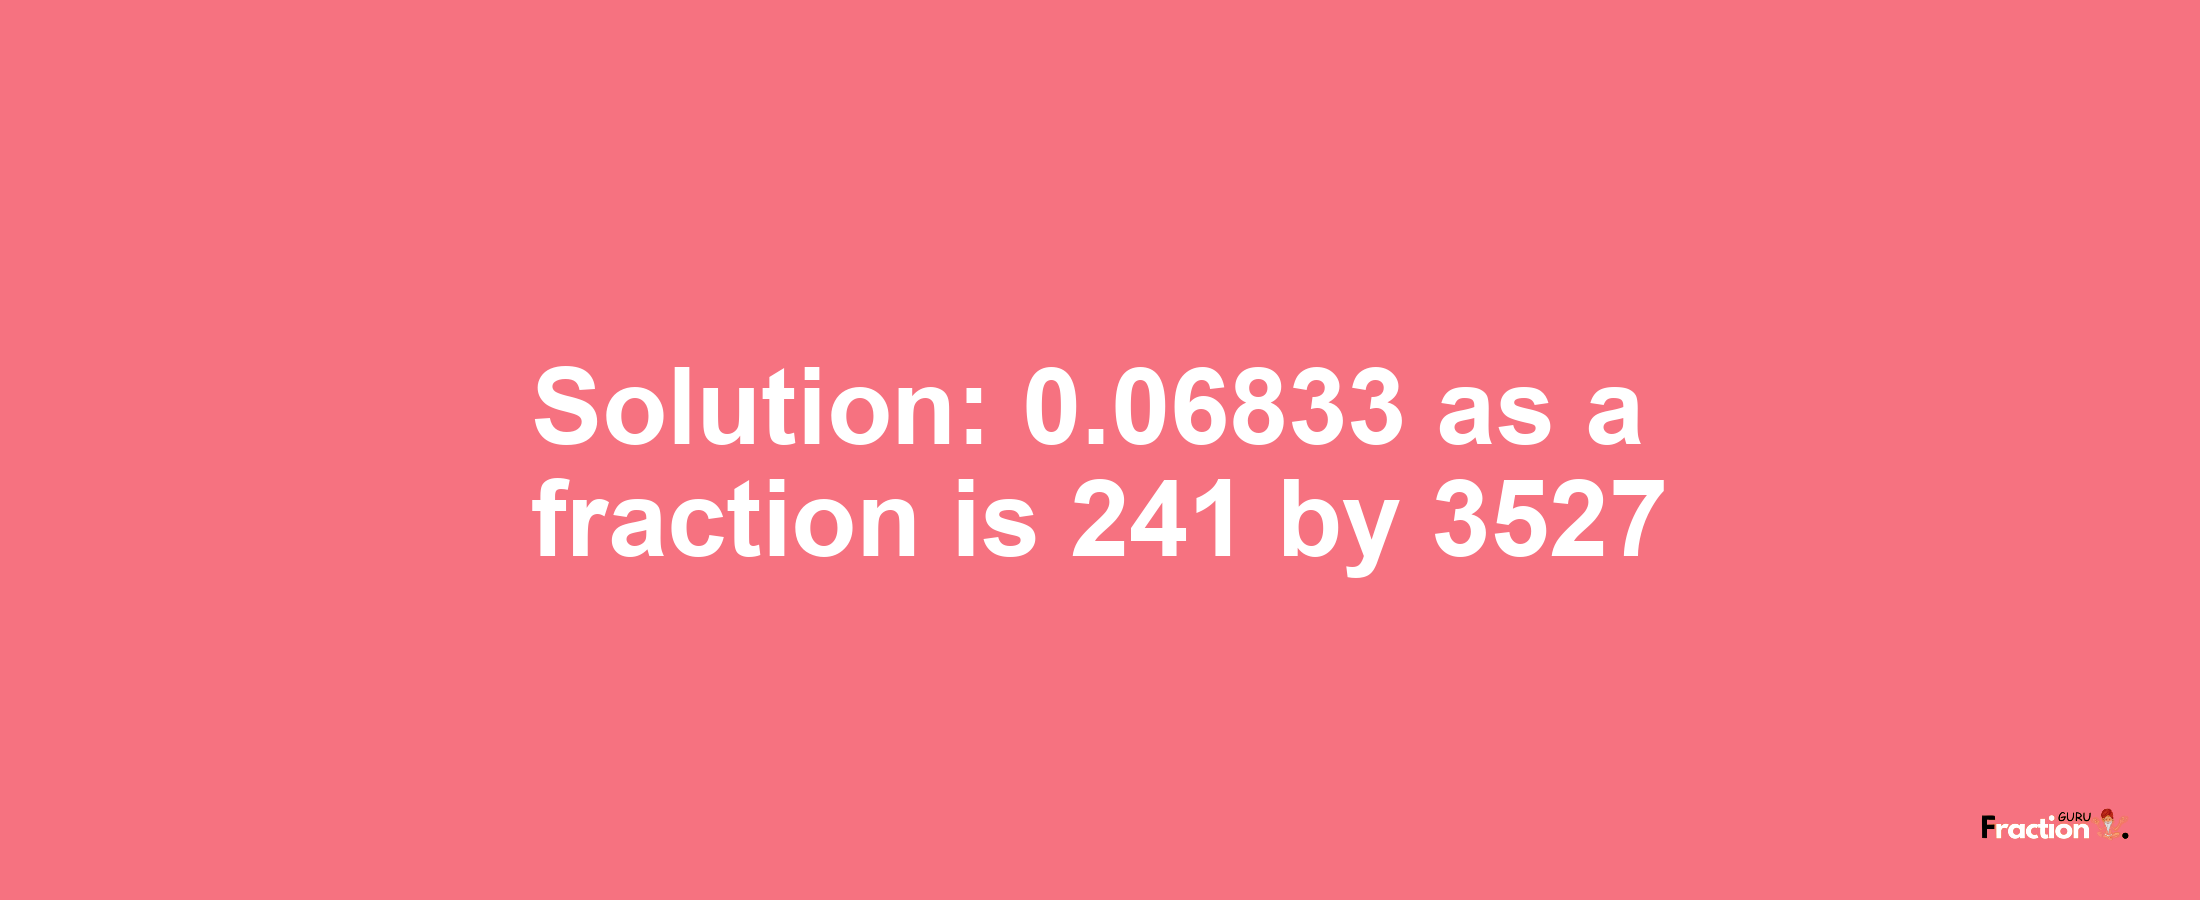 Solution:0.06833 as a fraction is 241/3527